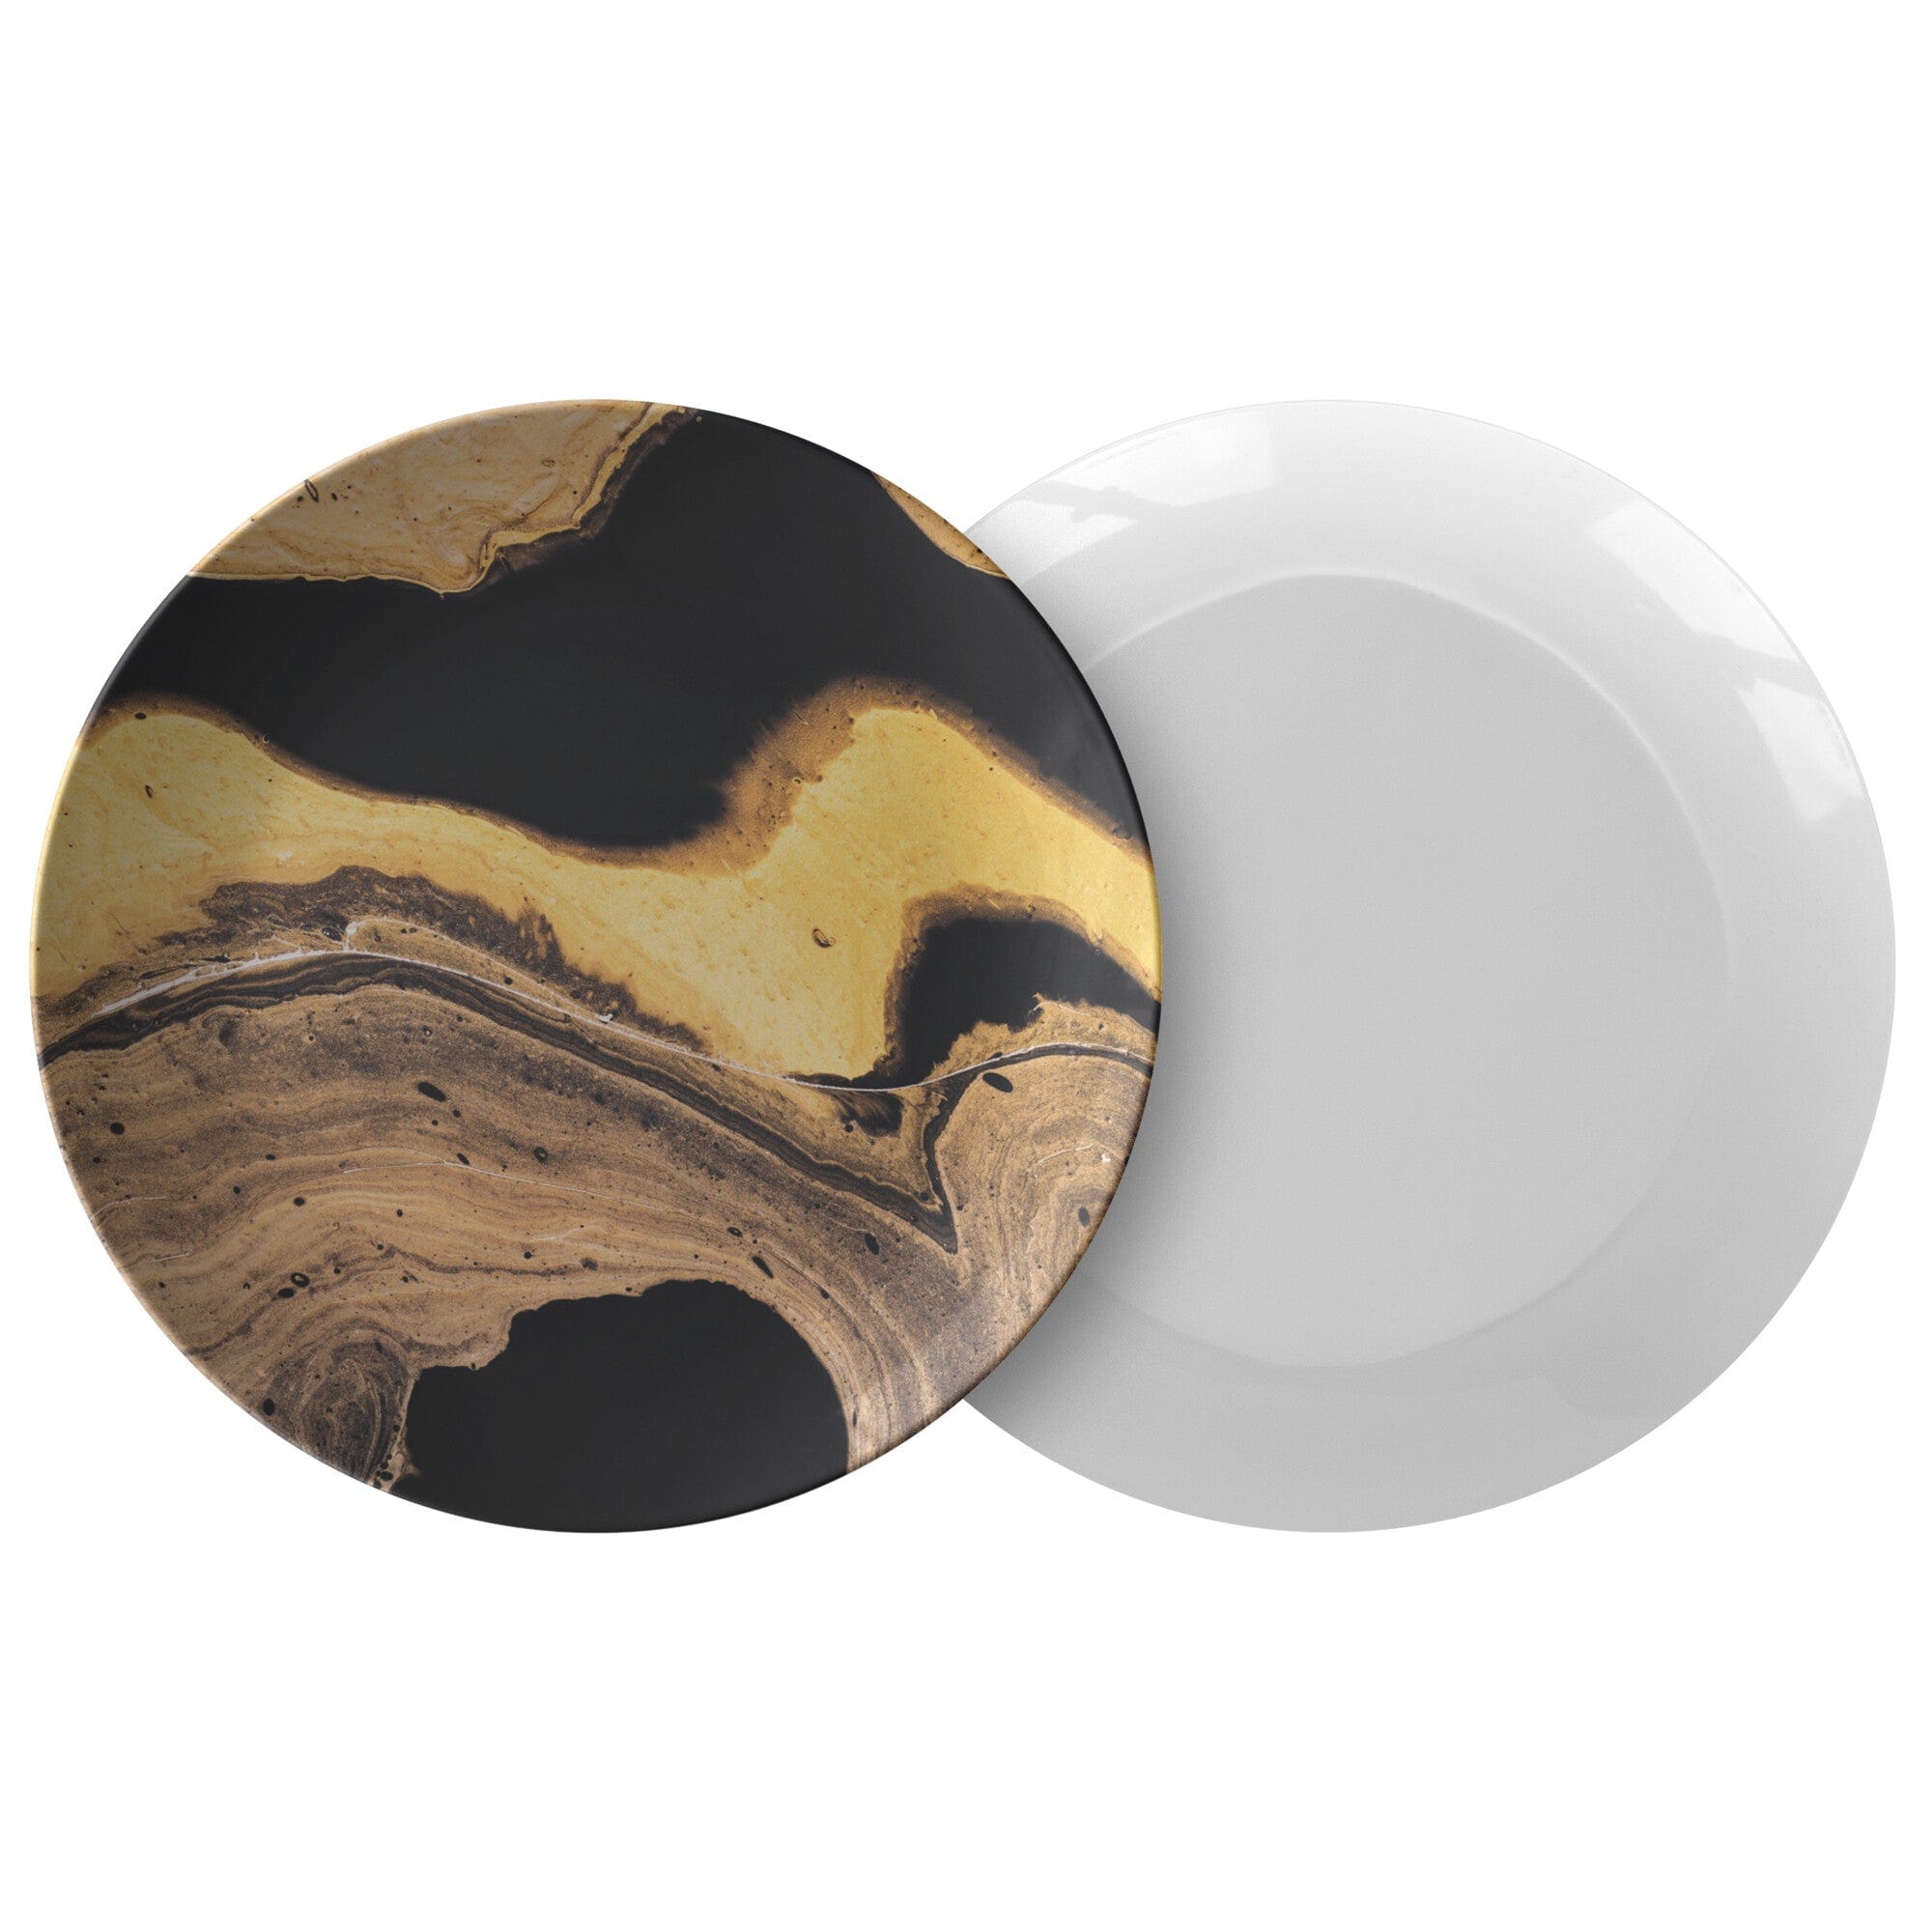 Kate McEnroe New York Dinner Plate in Black and Gold Abstract Liquid Marble Print Plates Single 9820SINGLE